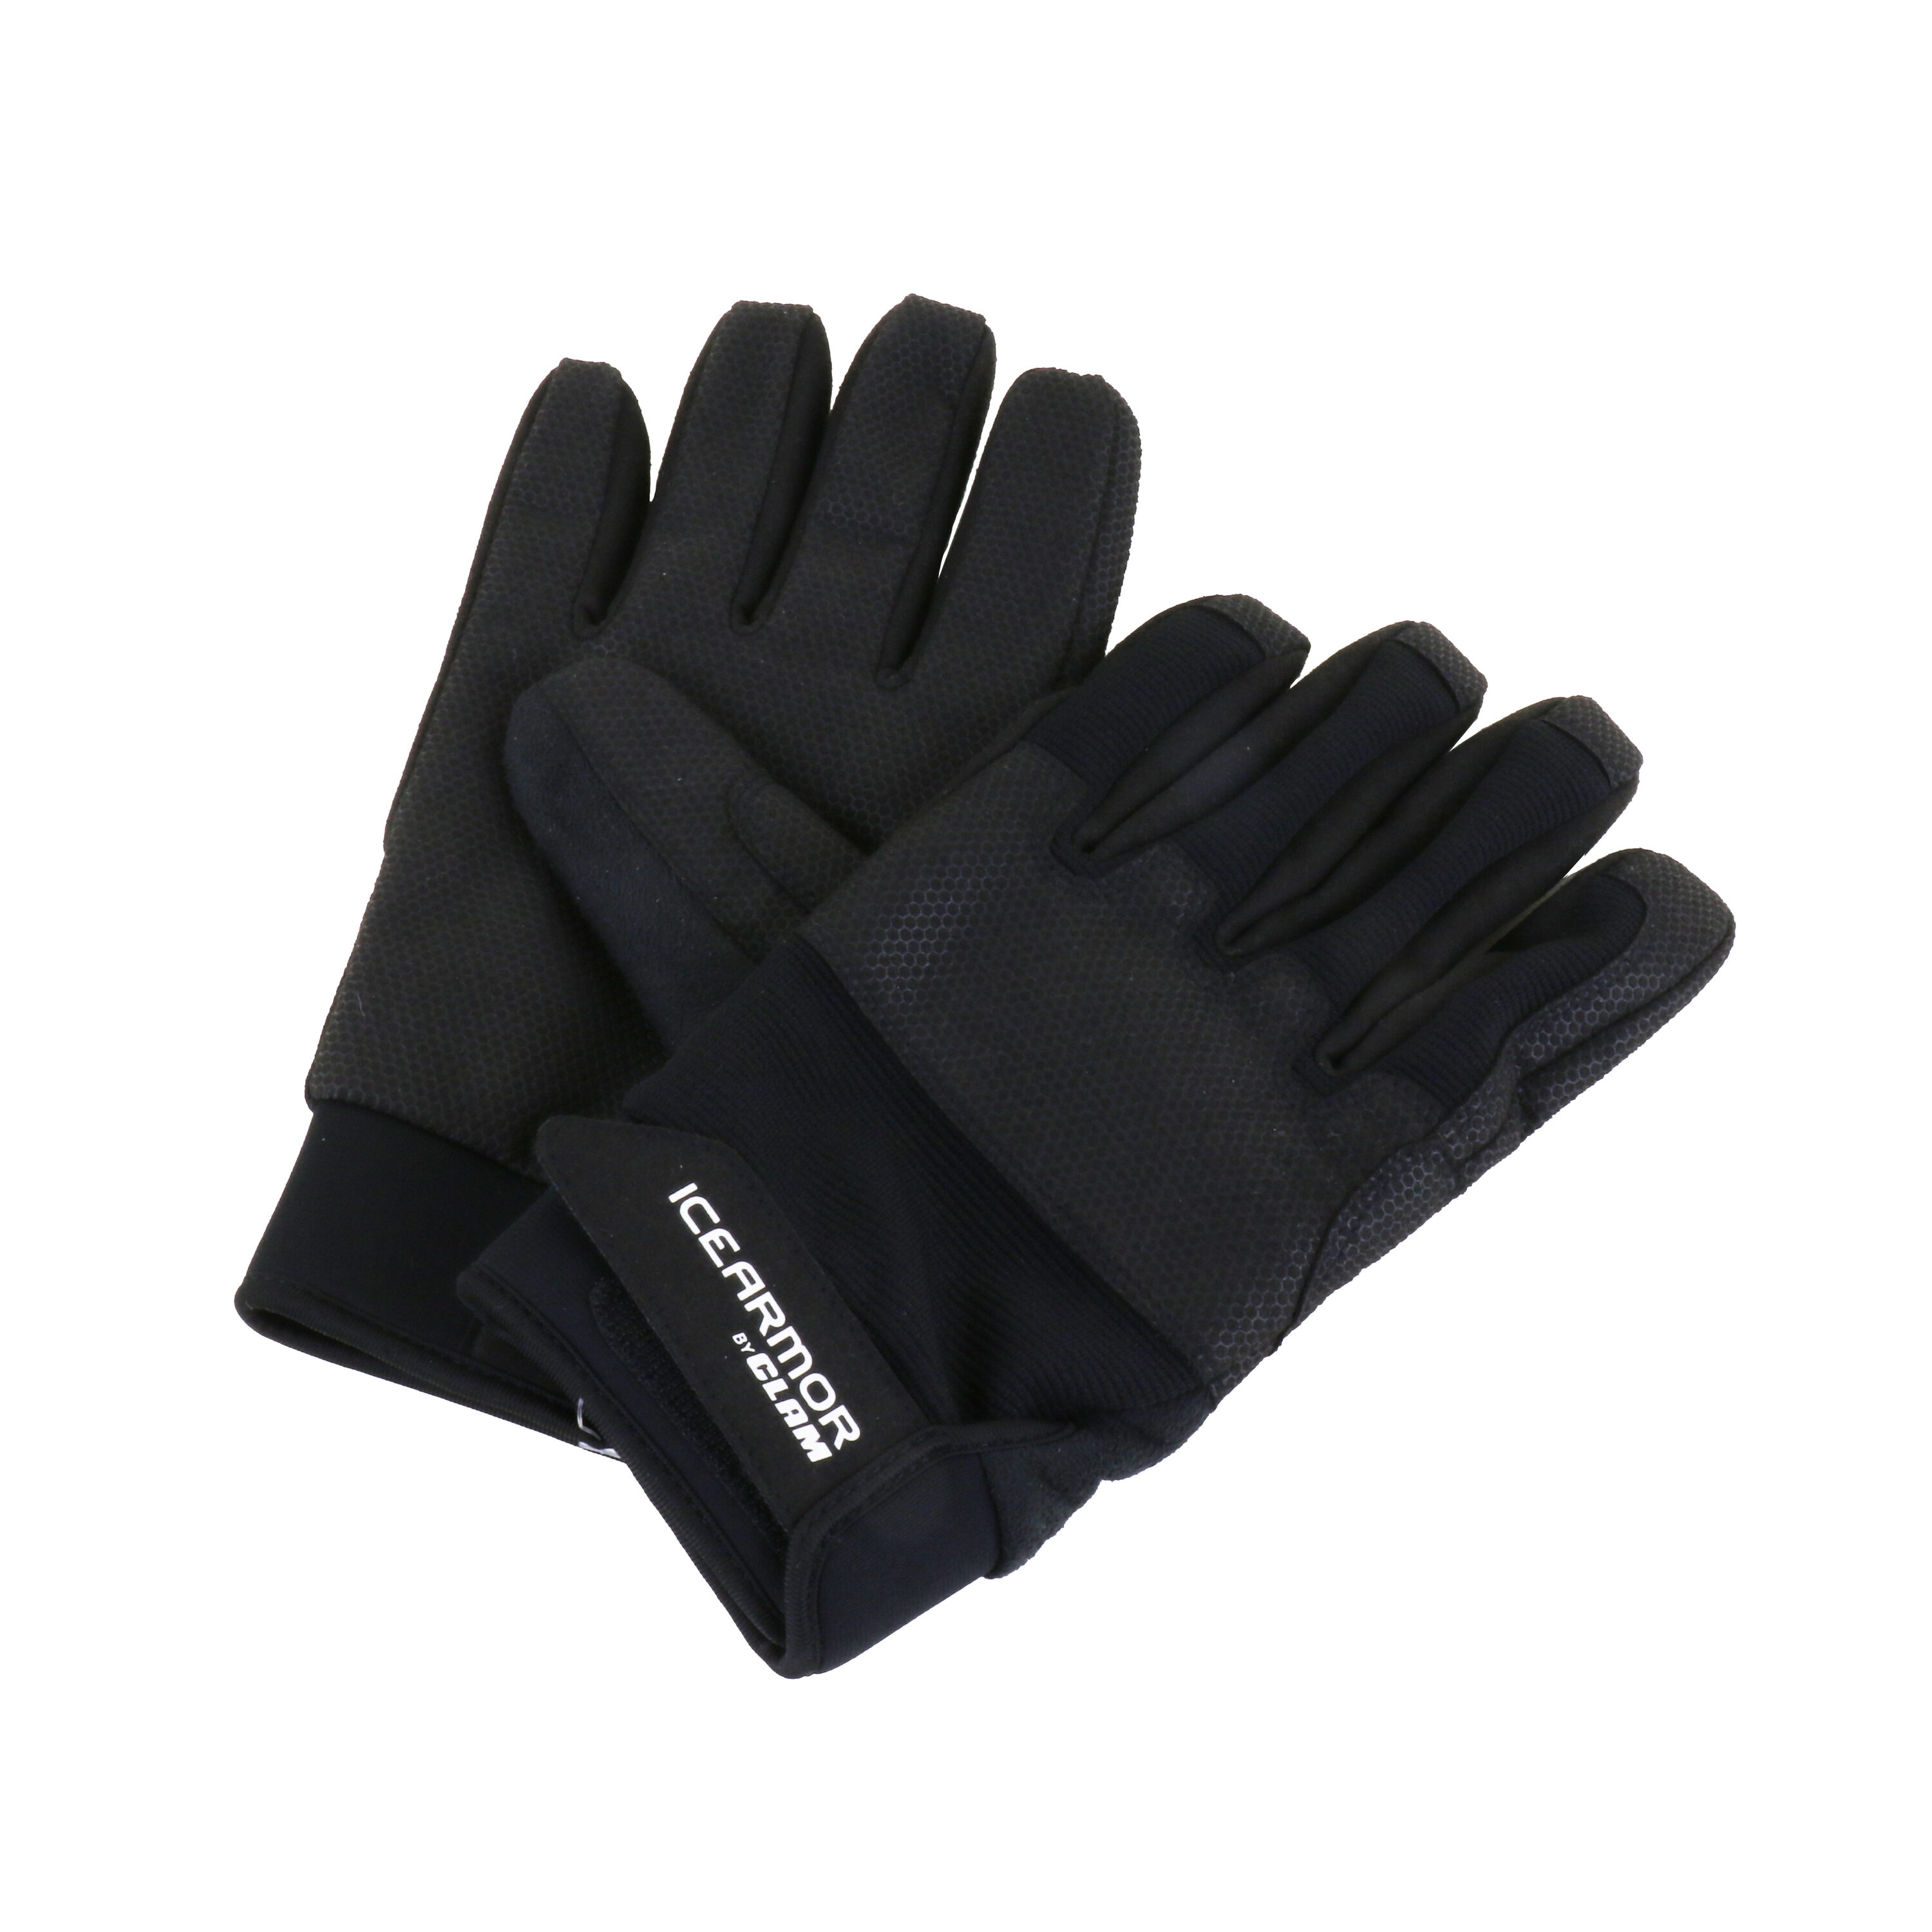 Clam Outdoors Waterproof Tactical Ice Fishing Glove - Sm in the